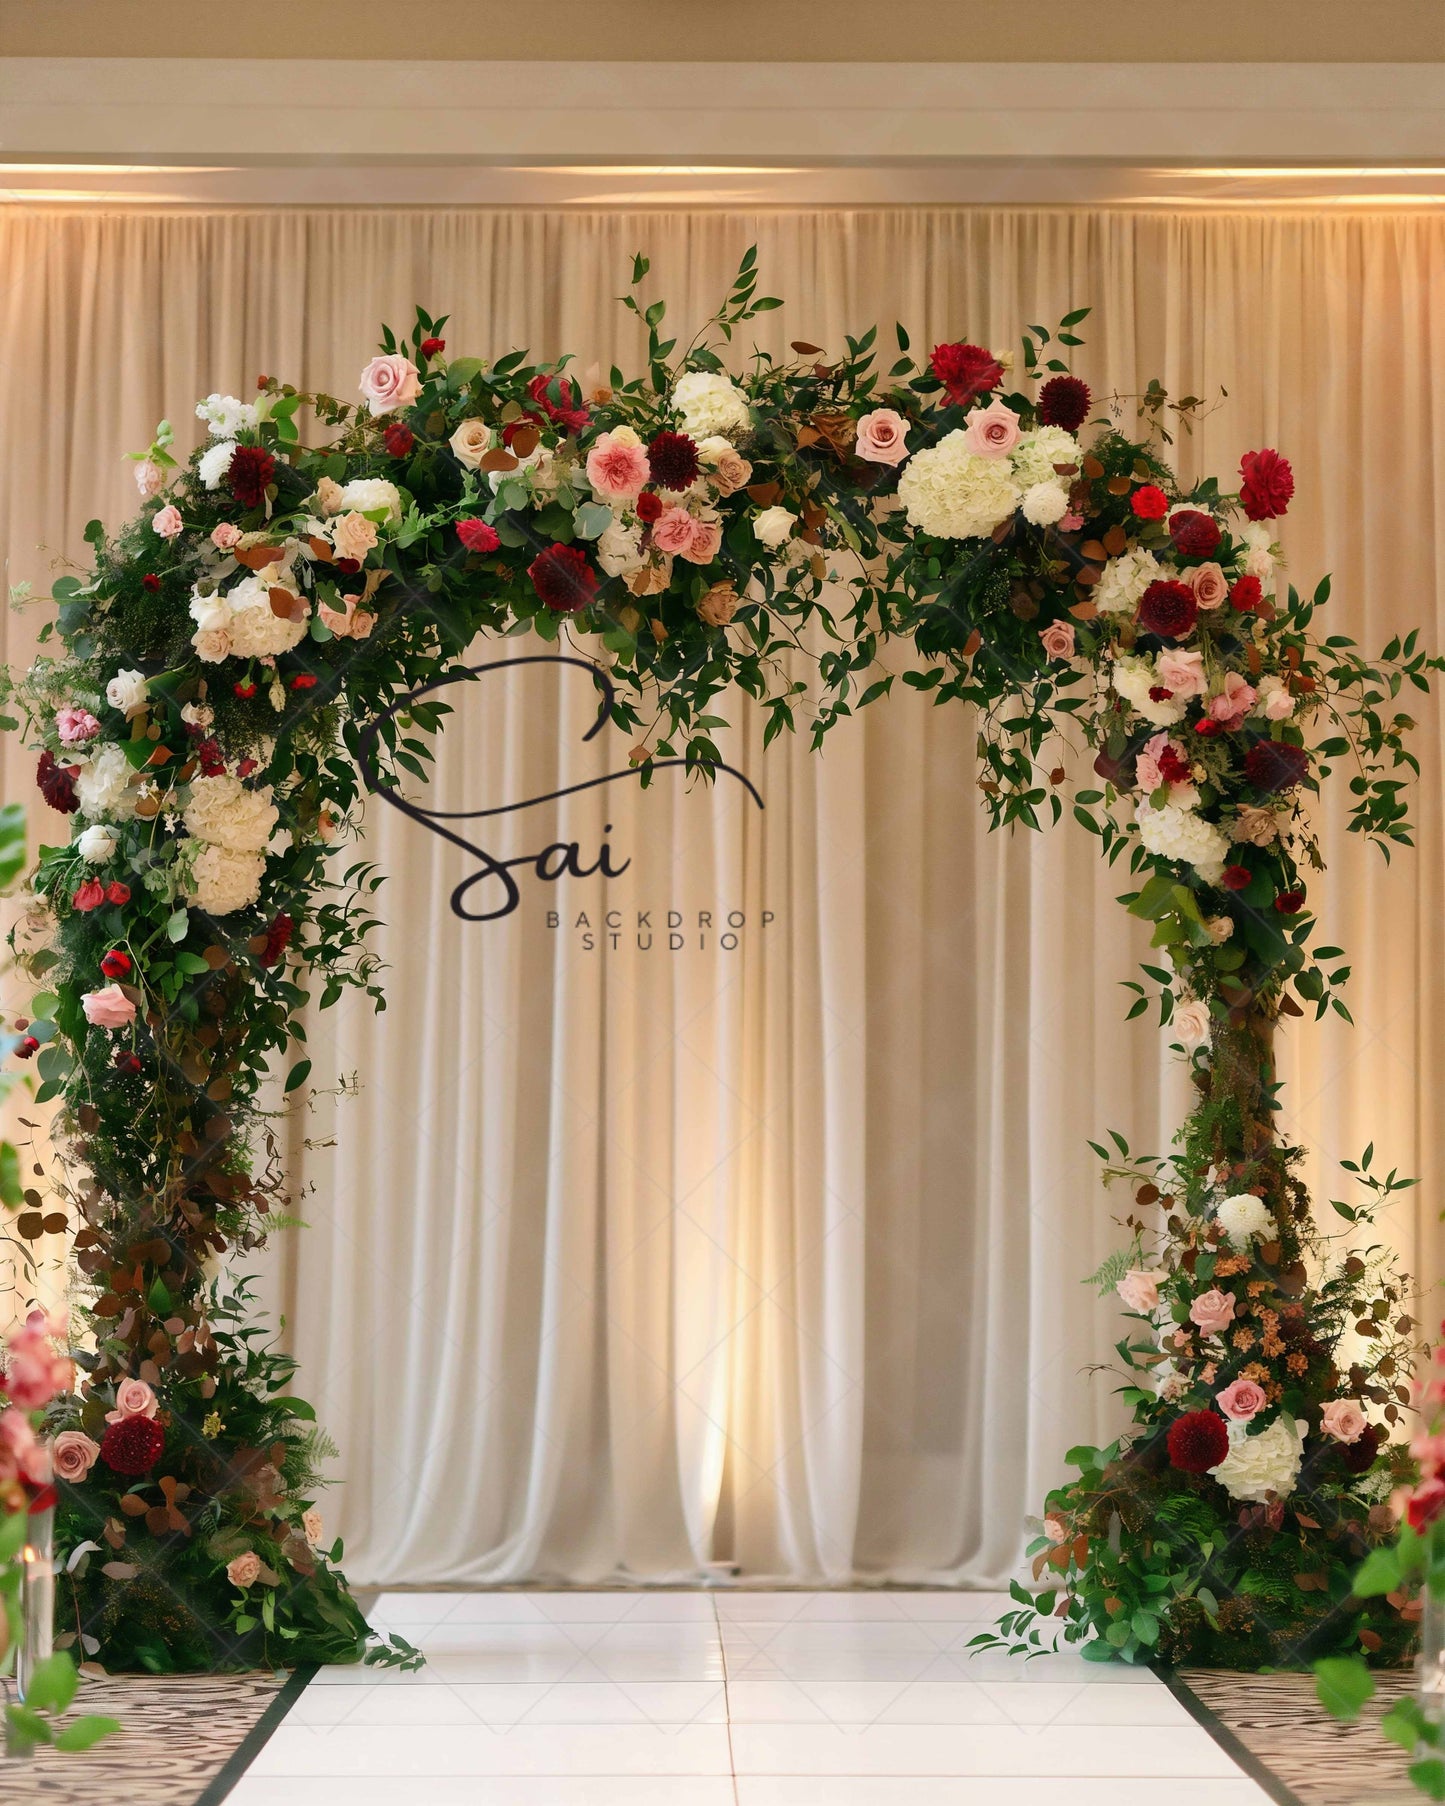 Floral Elegance Arch - Digital Backdrop - With Personal and Commercial License for Businesses